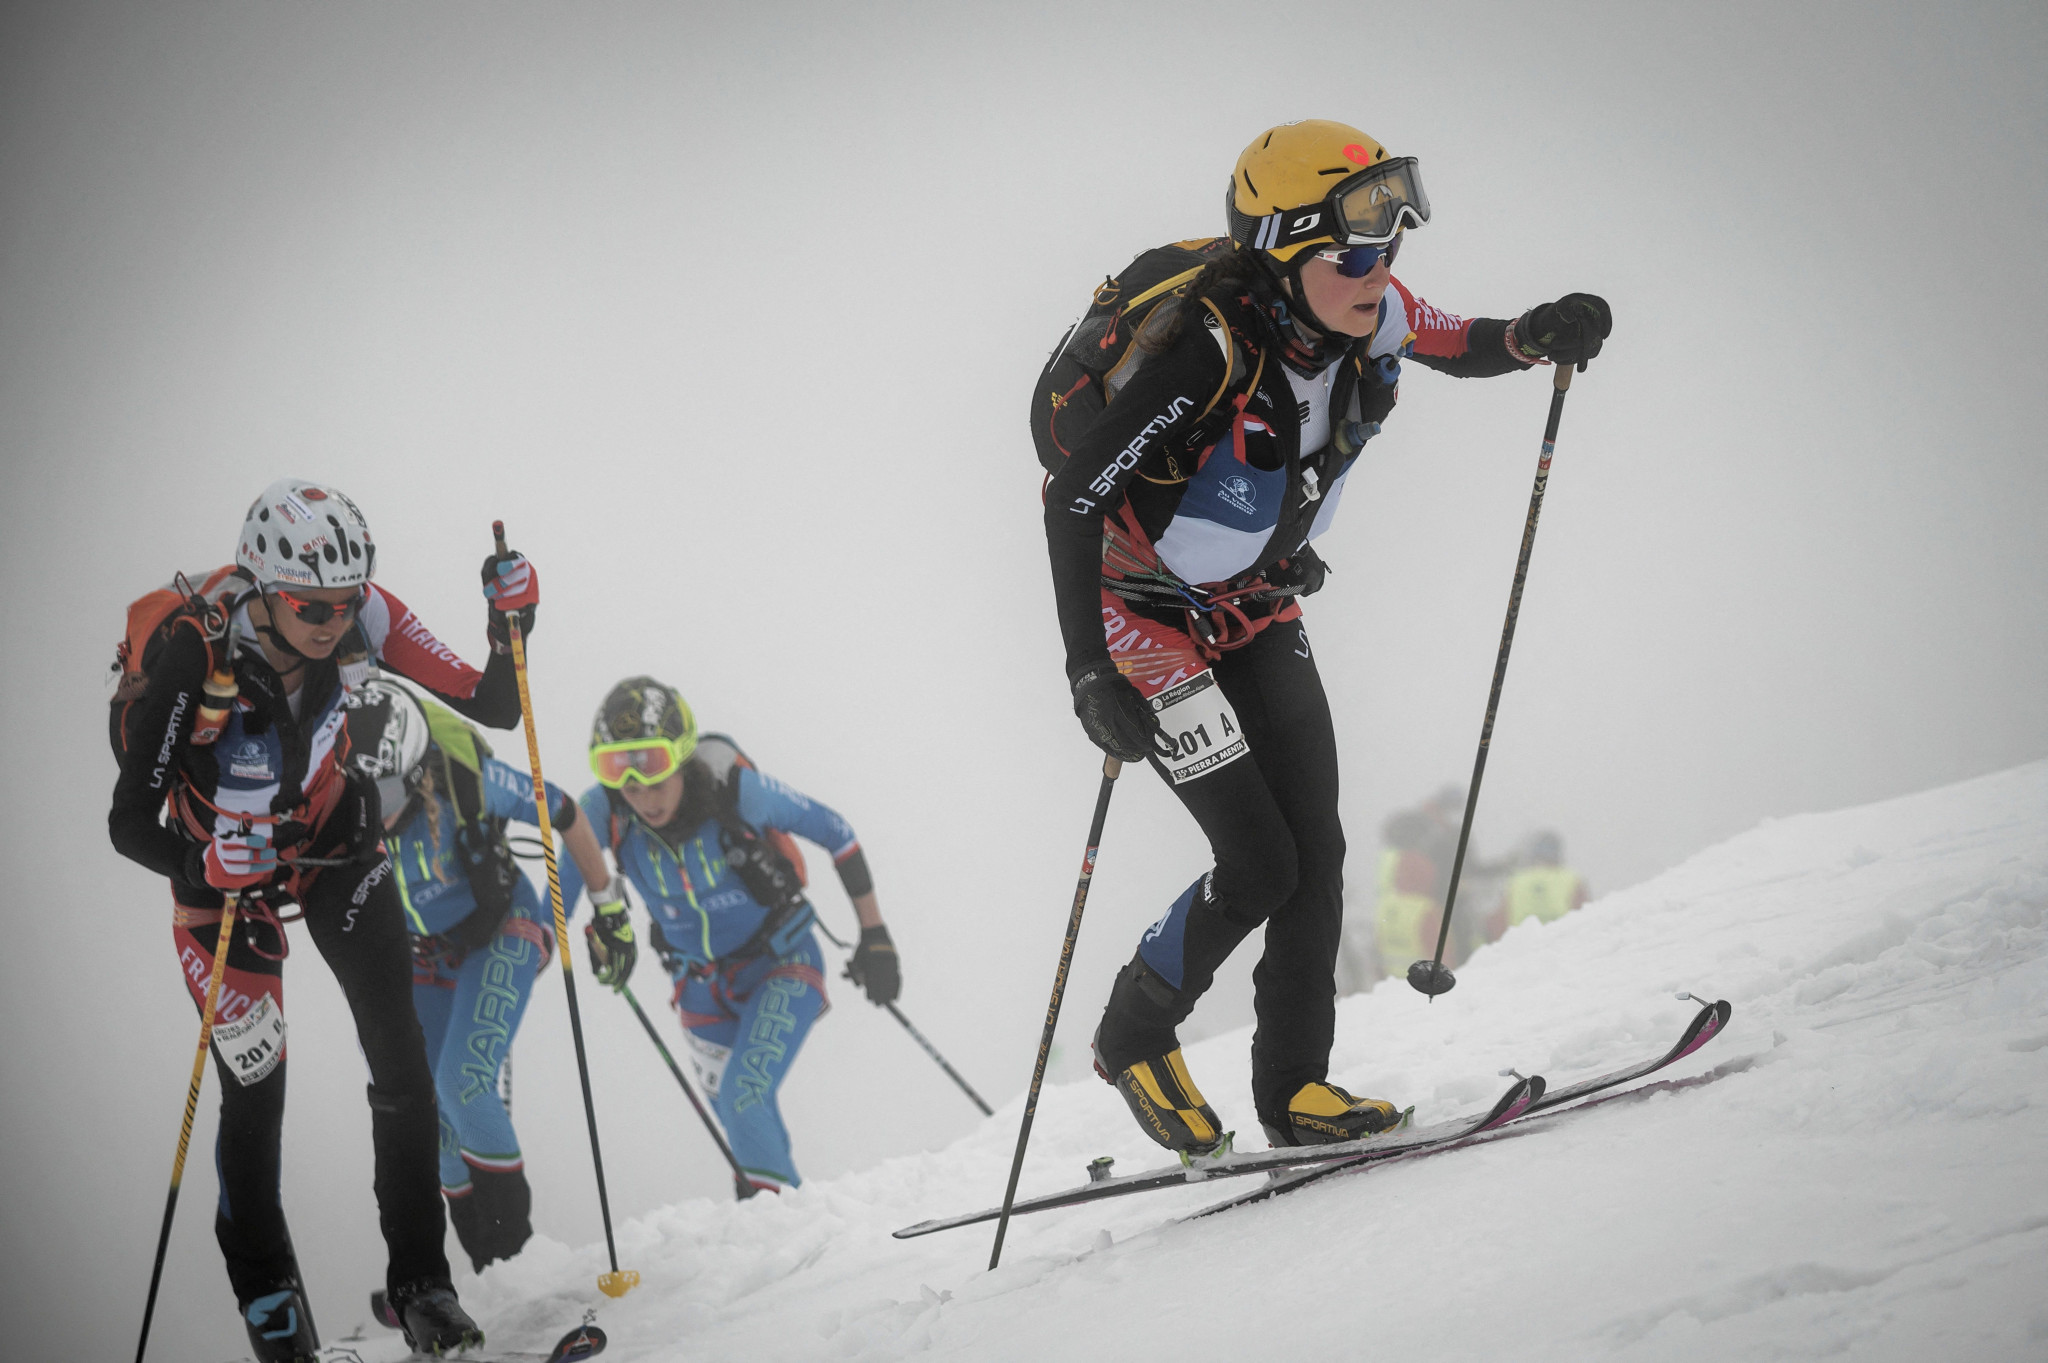 Gachet Mollaret and Gachet tipped for victory at final International Ski Mountaineering Federation World Cup of season